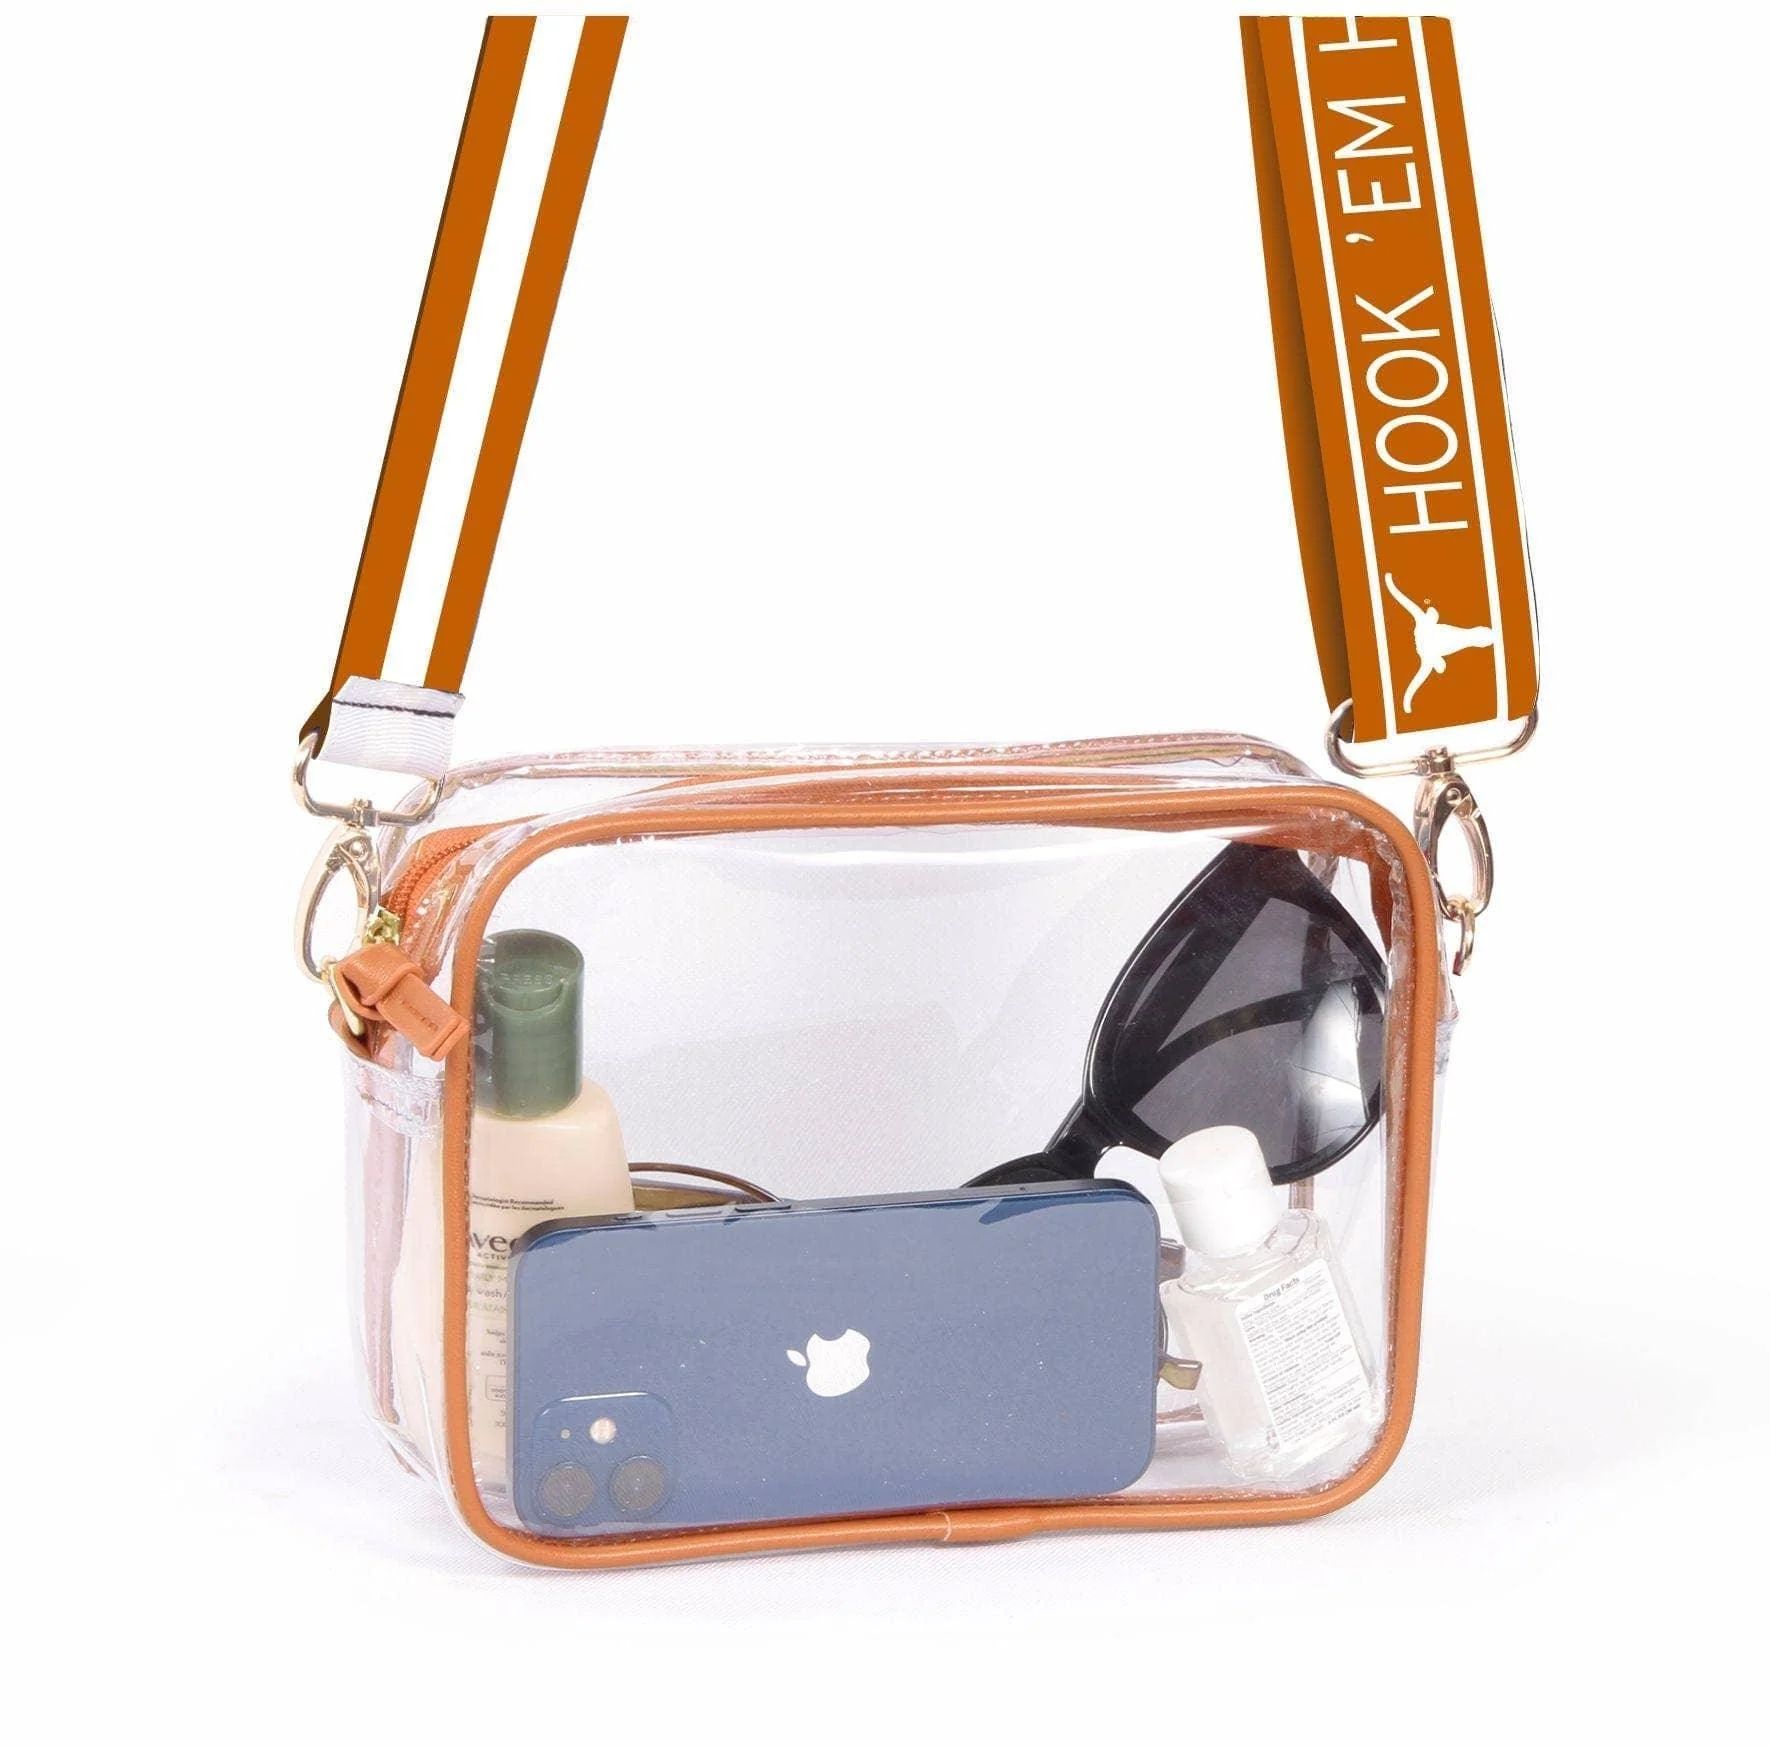 University Clear Purse with Reversible Patterned Shoulder Straps - multiple options | Sorelle Gifts